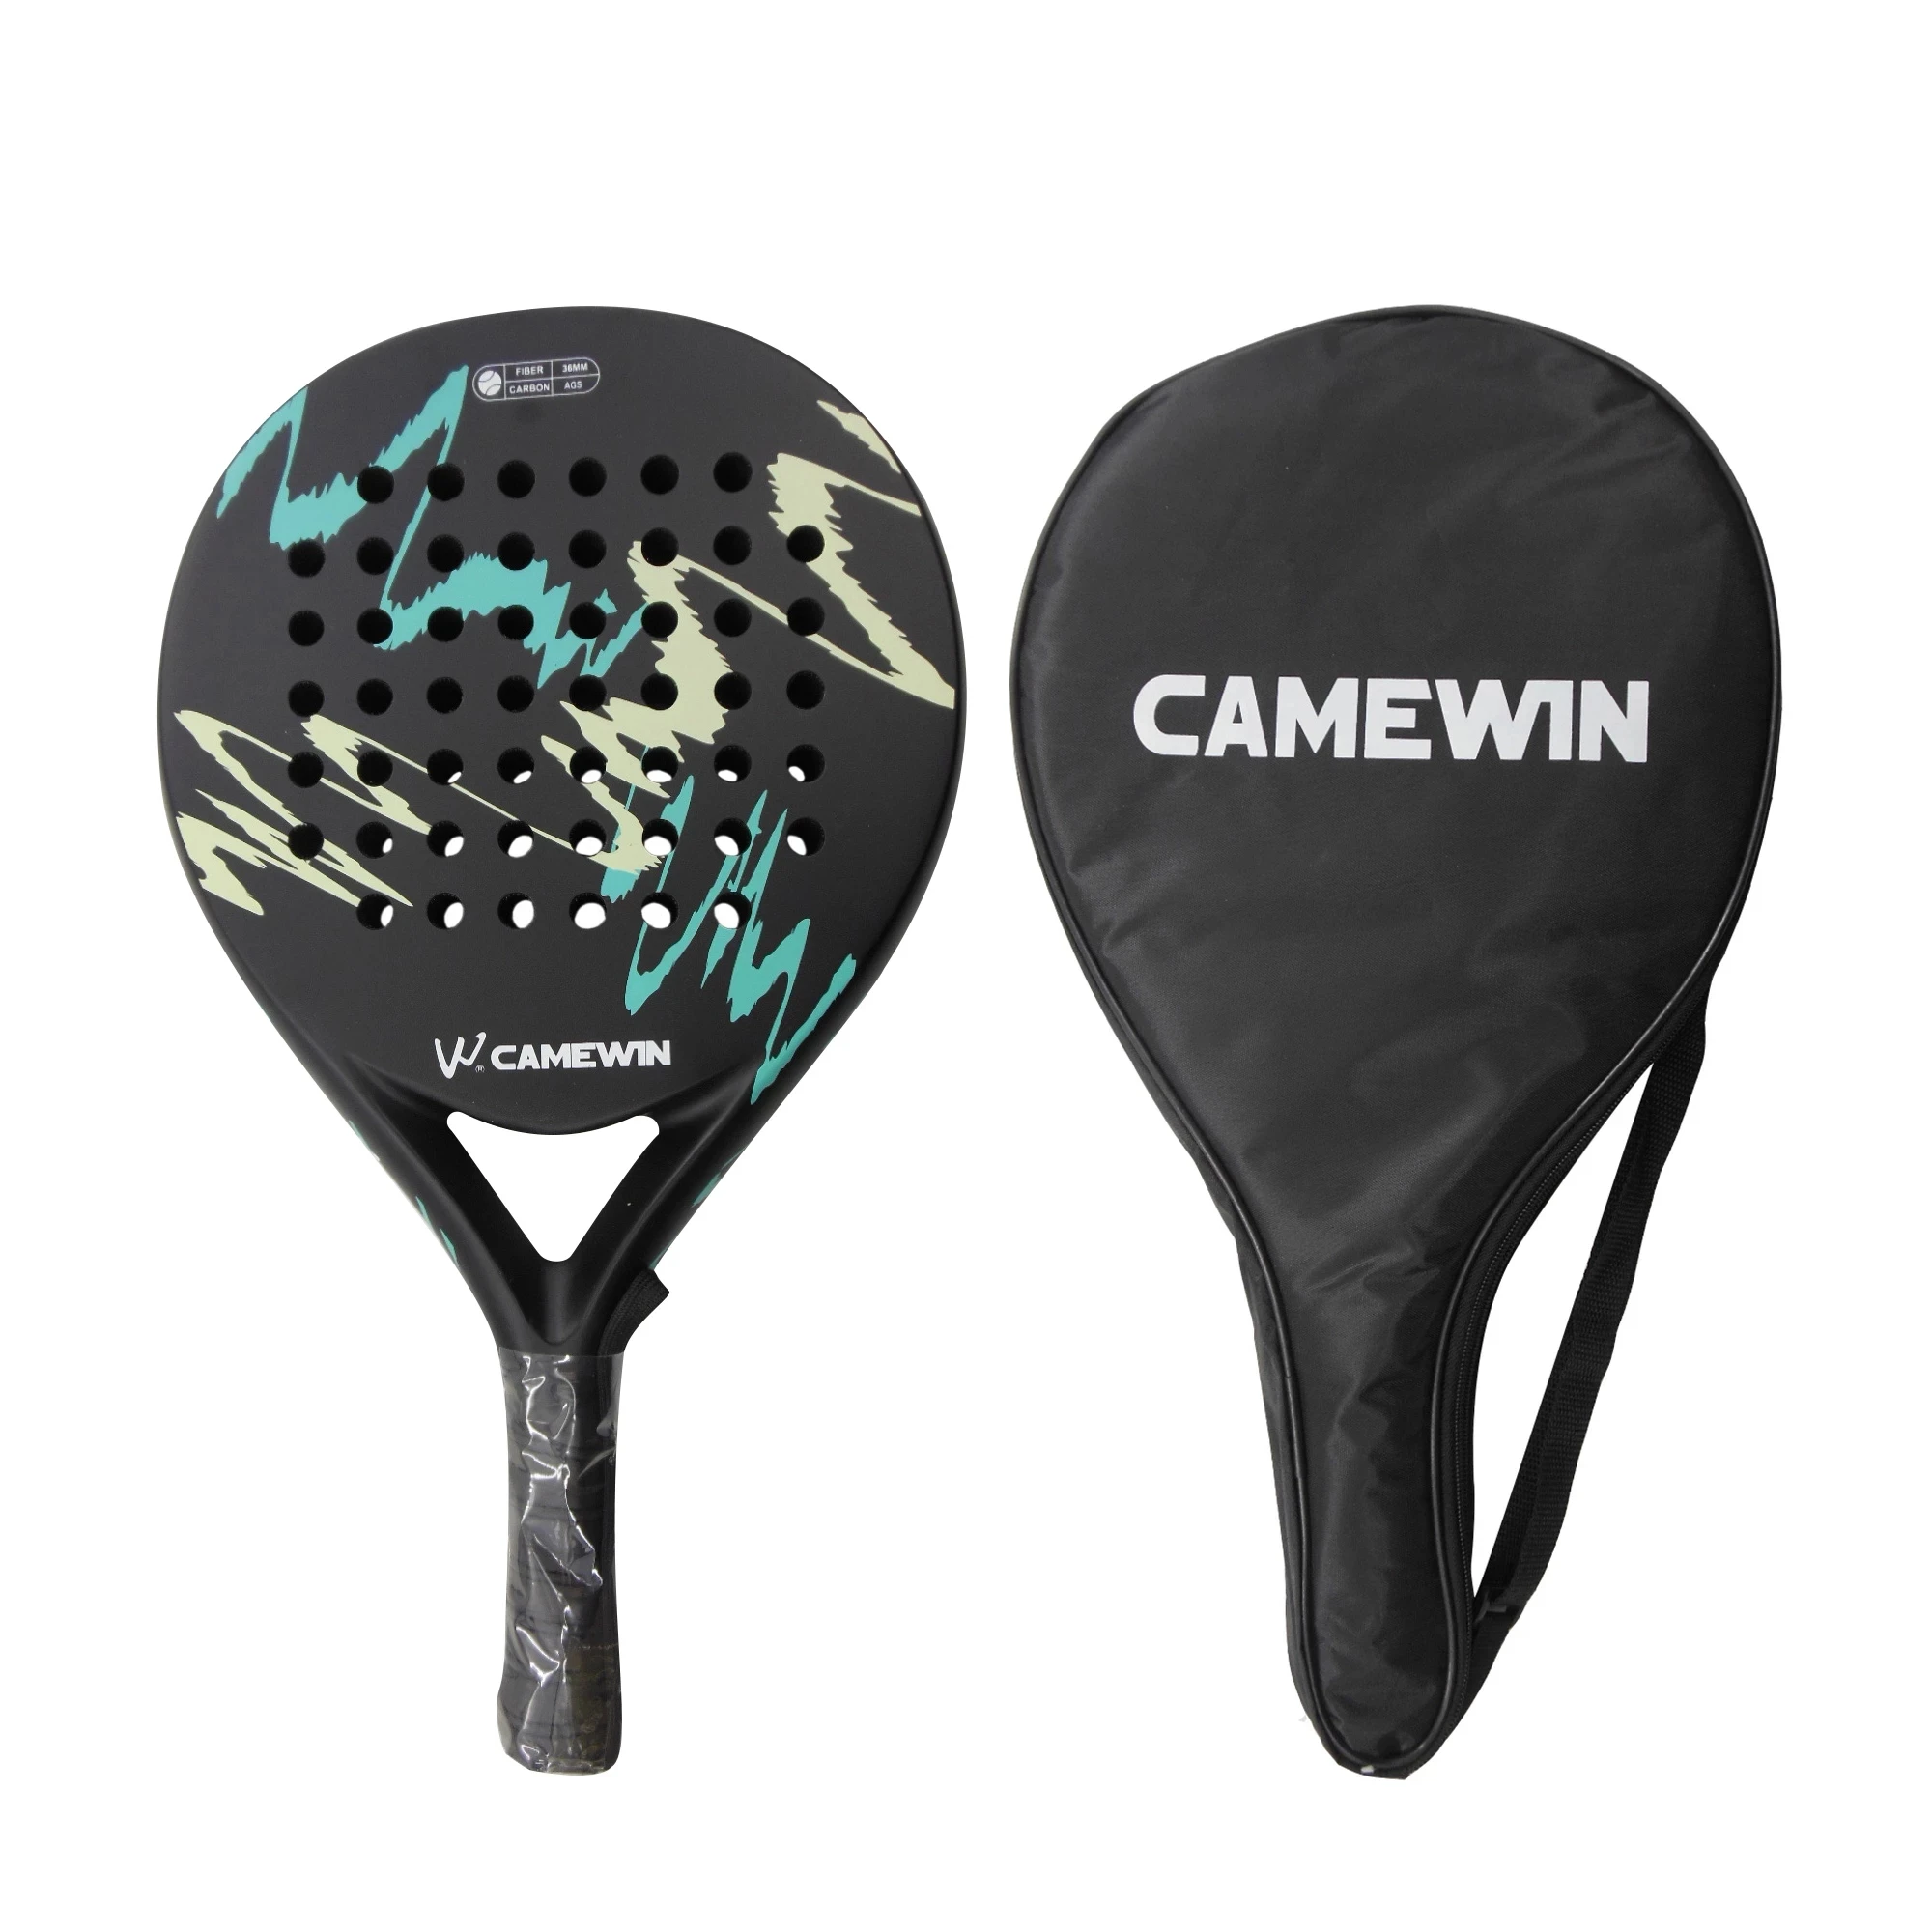 Camewin Beach Tennis Racket Carbon Professional Carbon And Glass Fiber Padel Tennis Racket Soft Face Paddle Racquet With Bag - Tennis Rackets